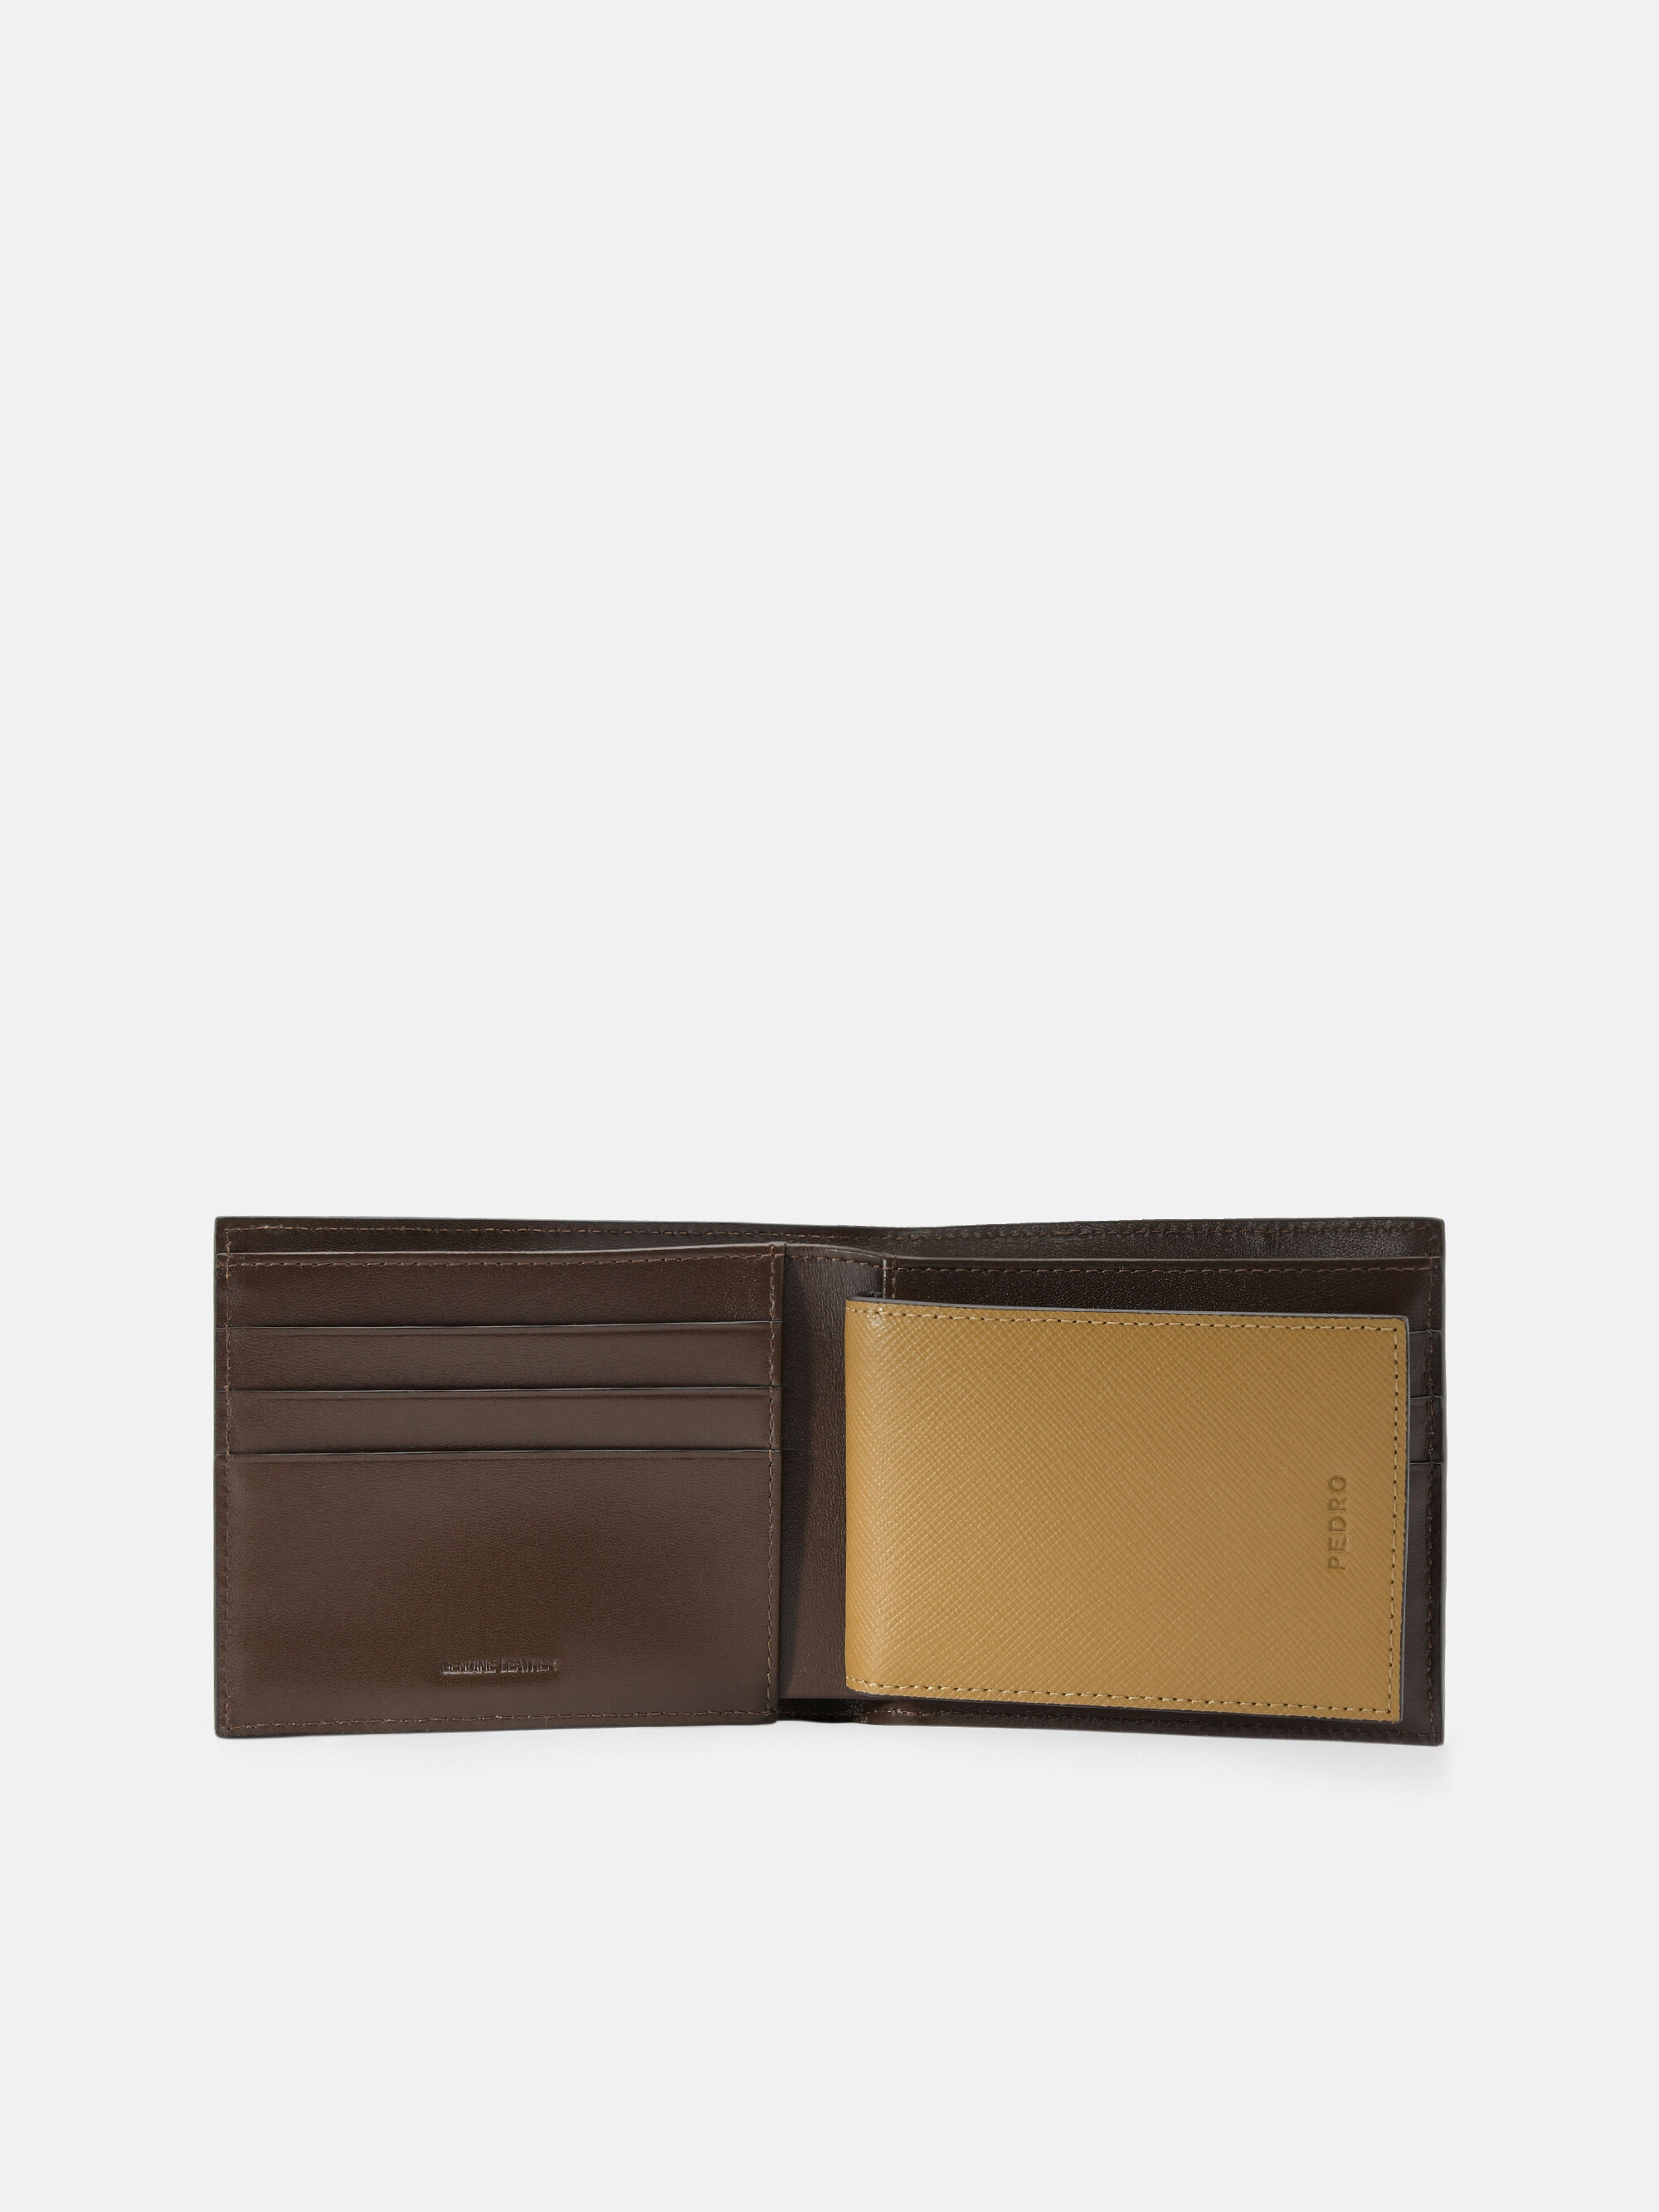 Saffiano Leather Bi-Fold Wallet with Insert, Cognac